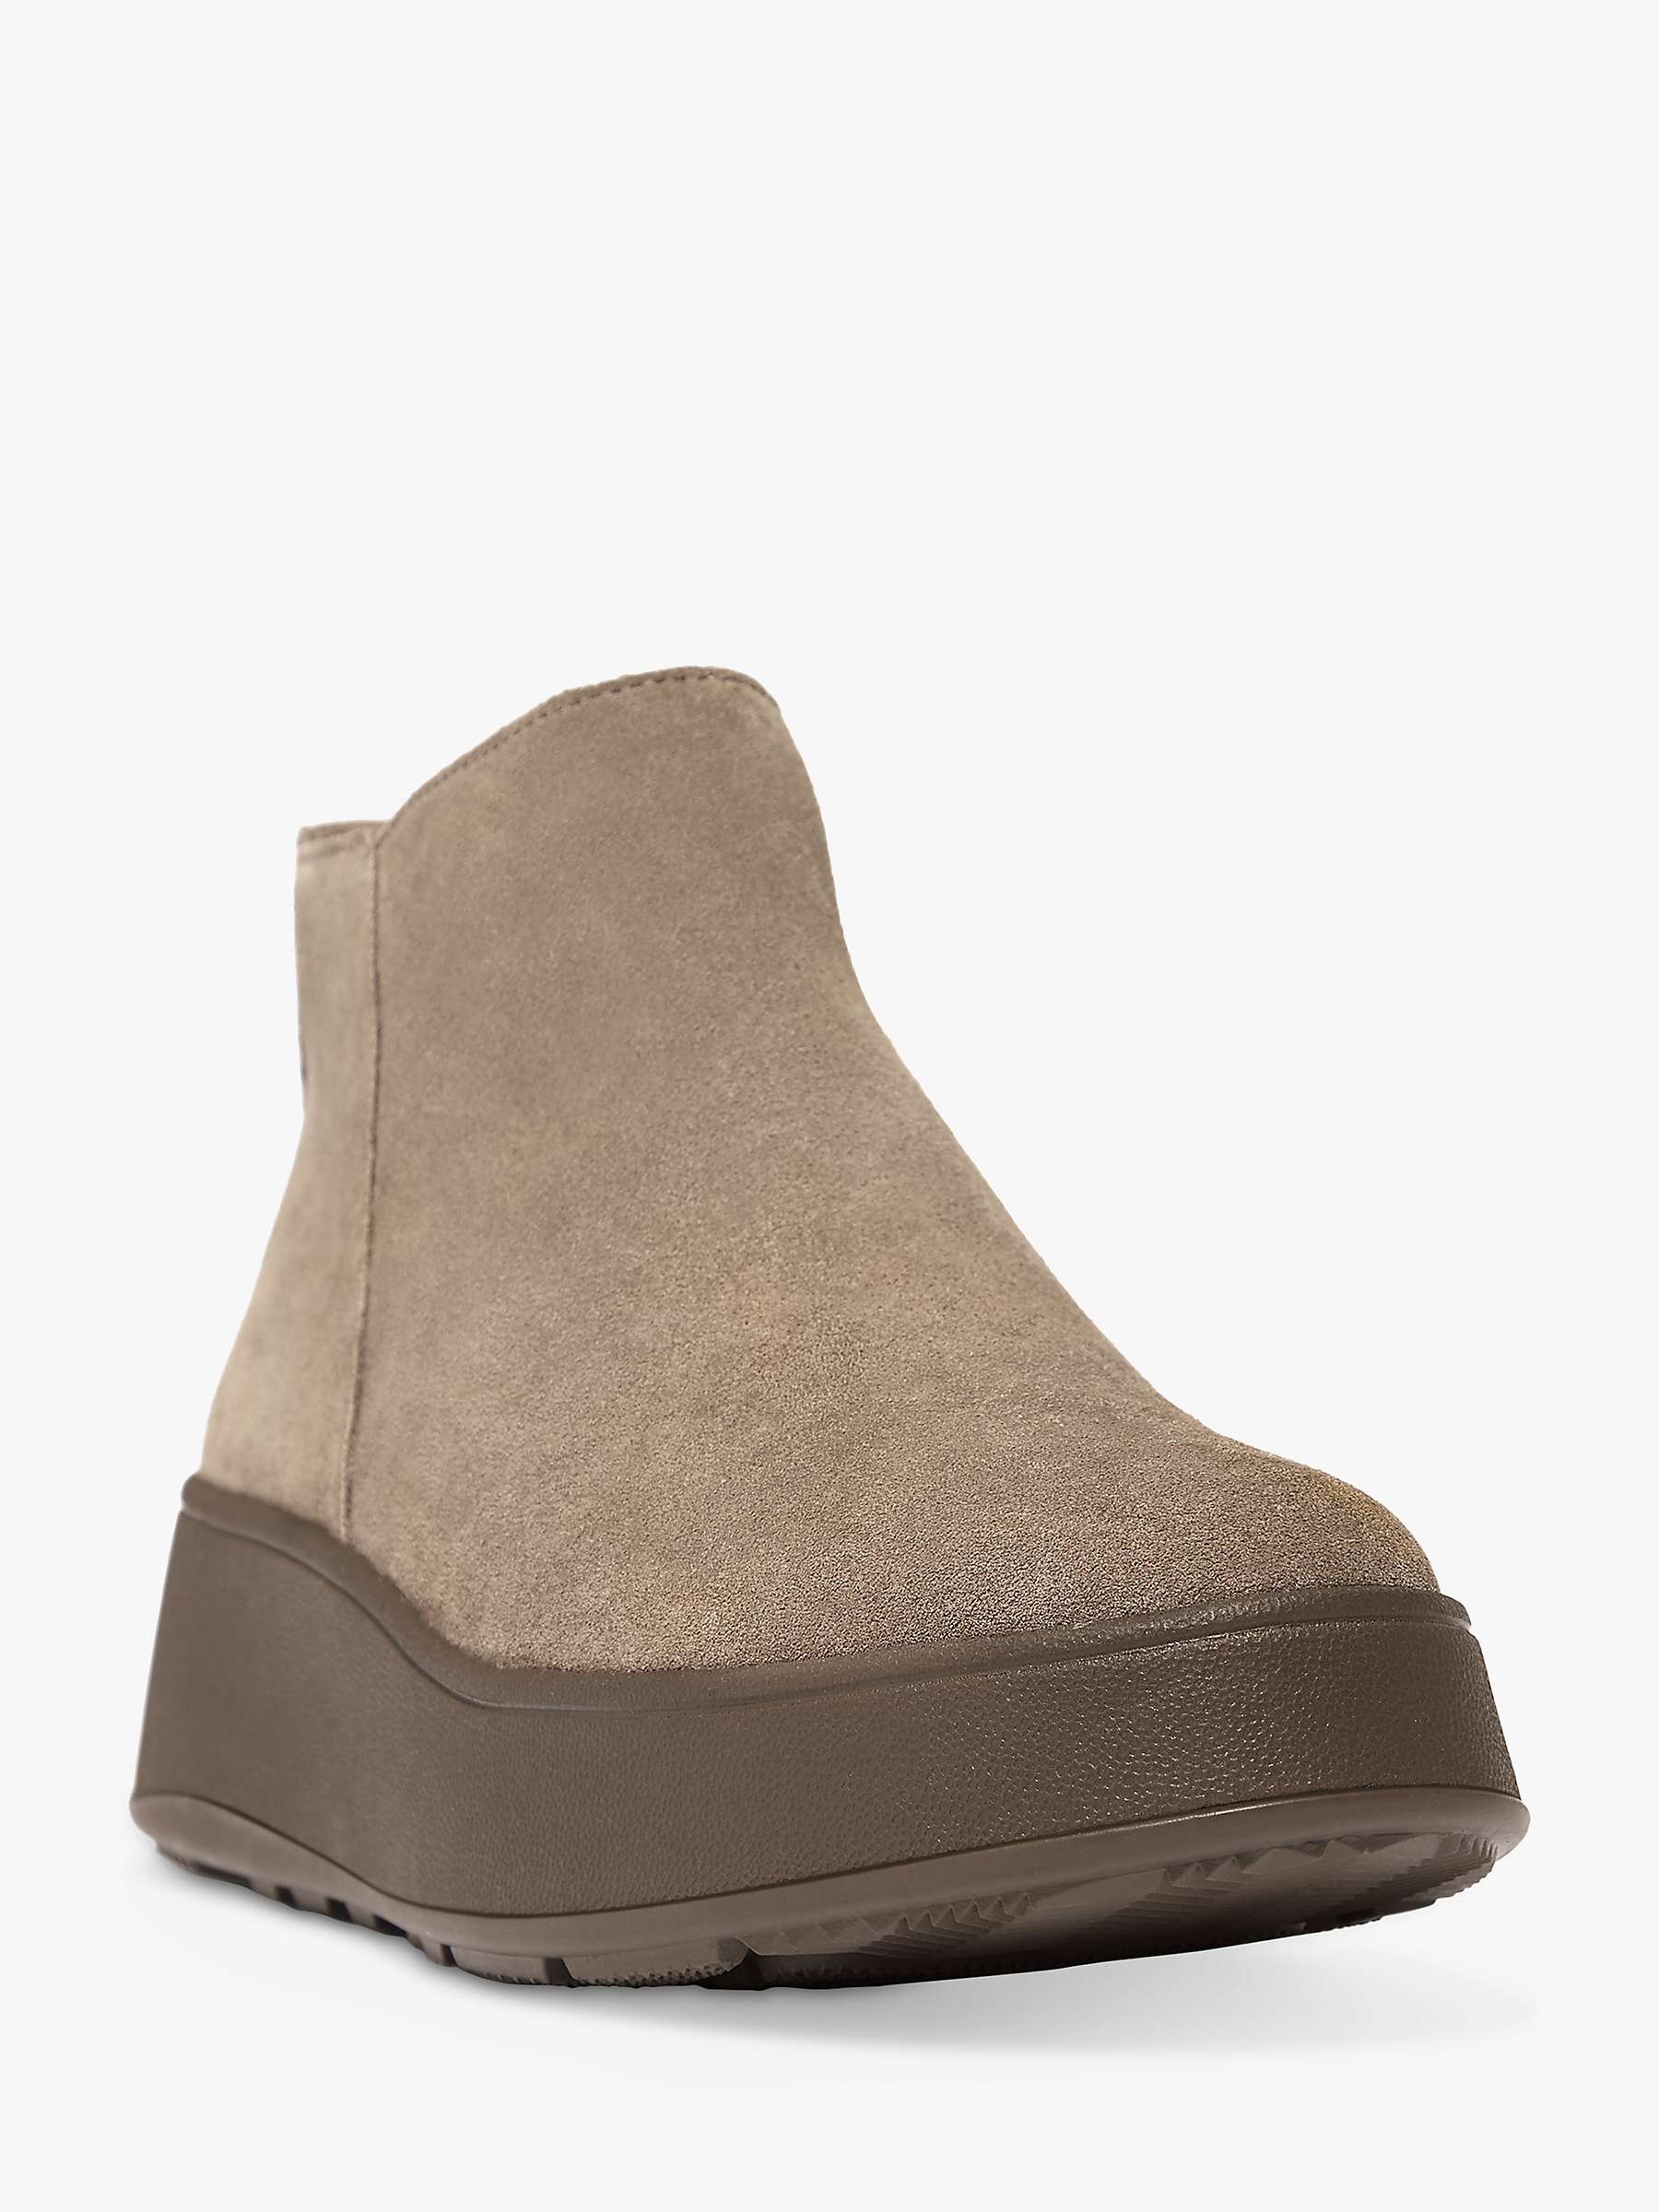 Buy FitFlop Suede Flatform Ankle Boots Online at johnlewis.com